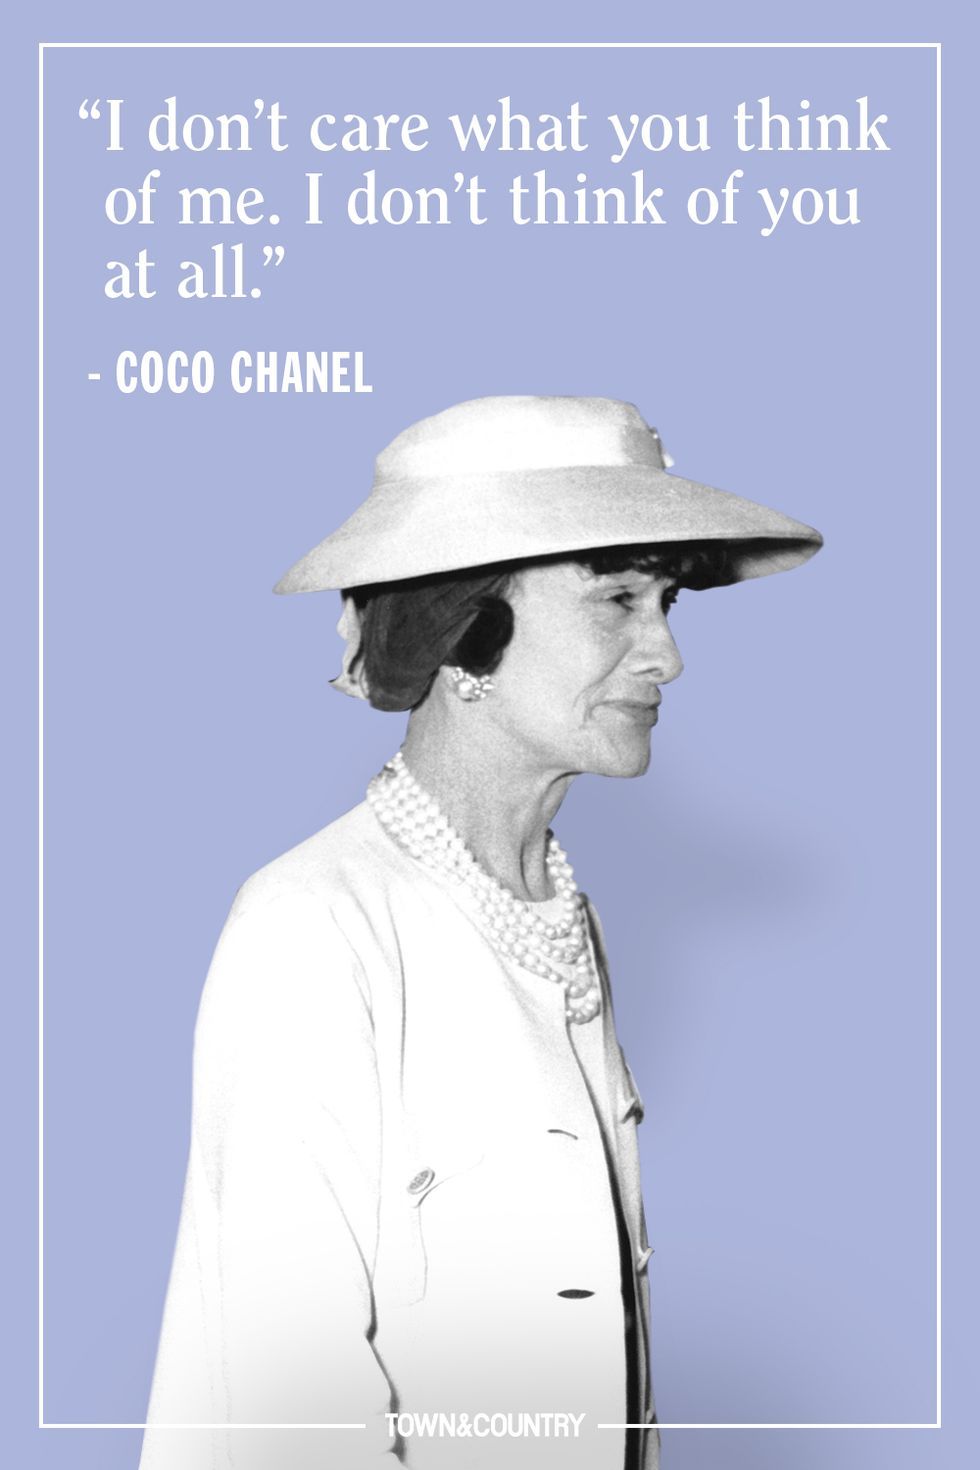 17 Coco Chanel Quotes That Will Seriously Up Your Hustle